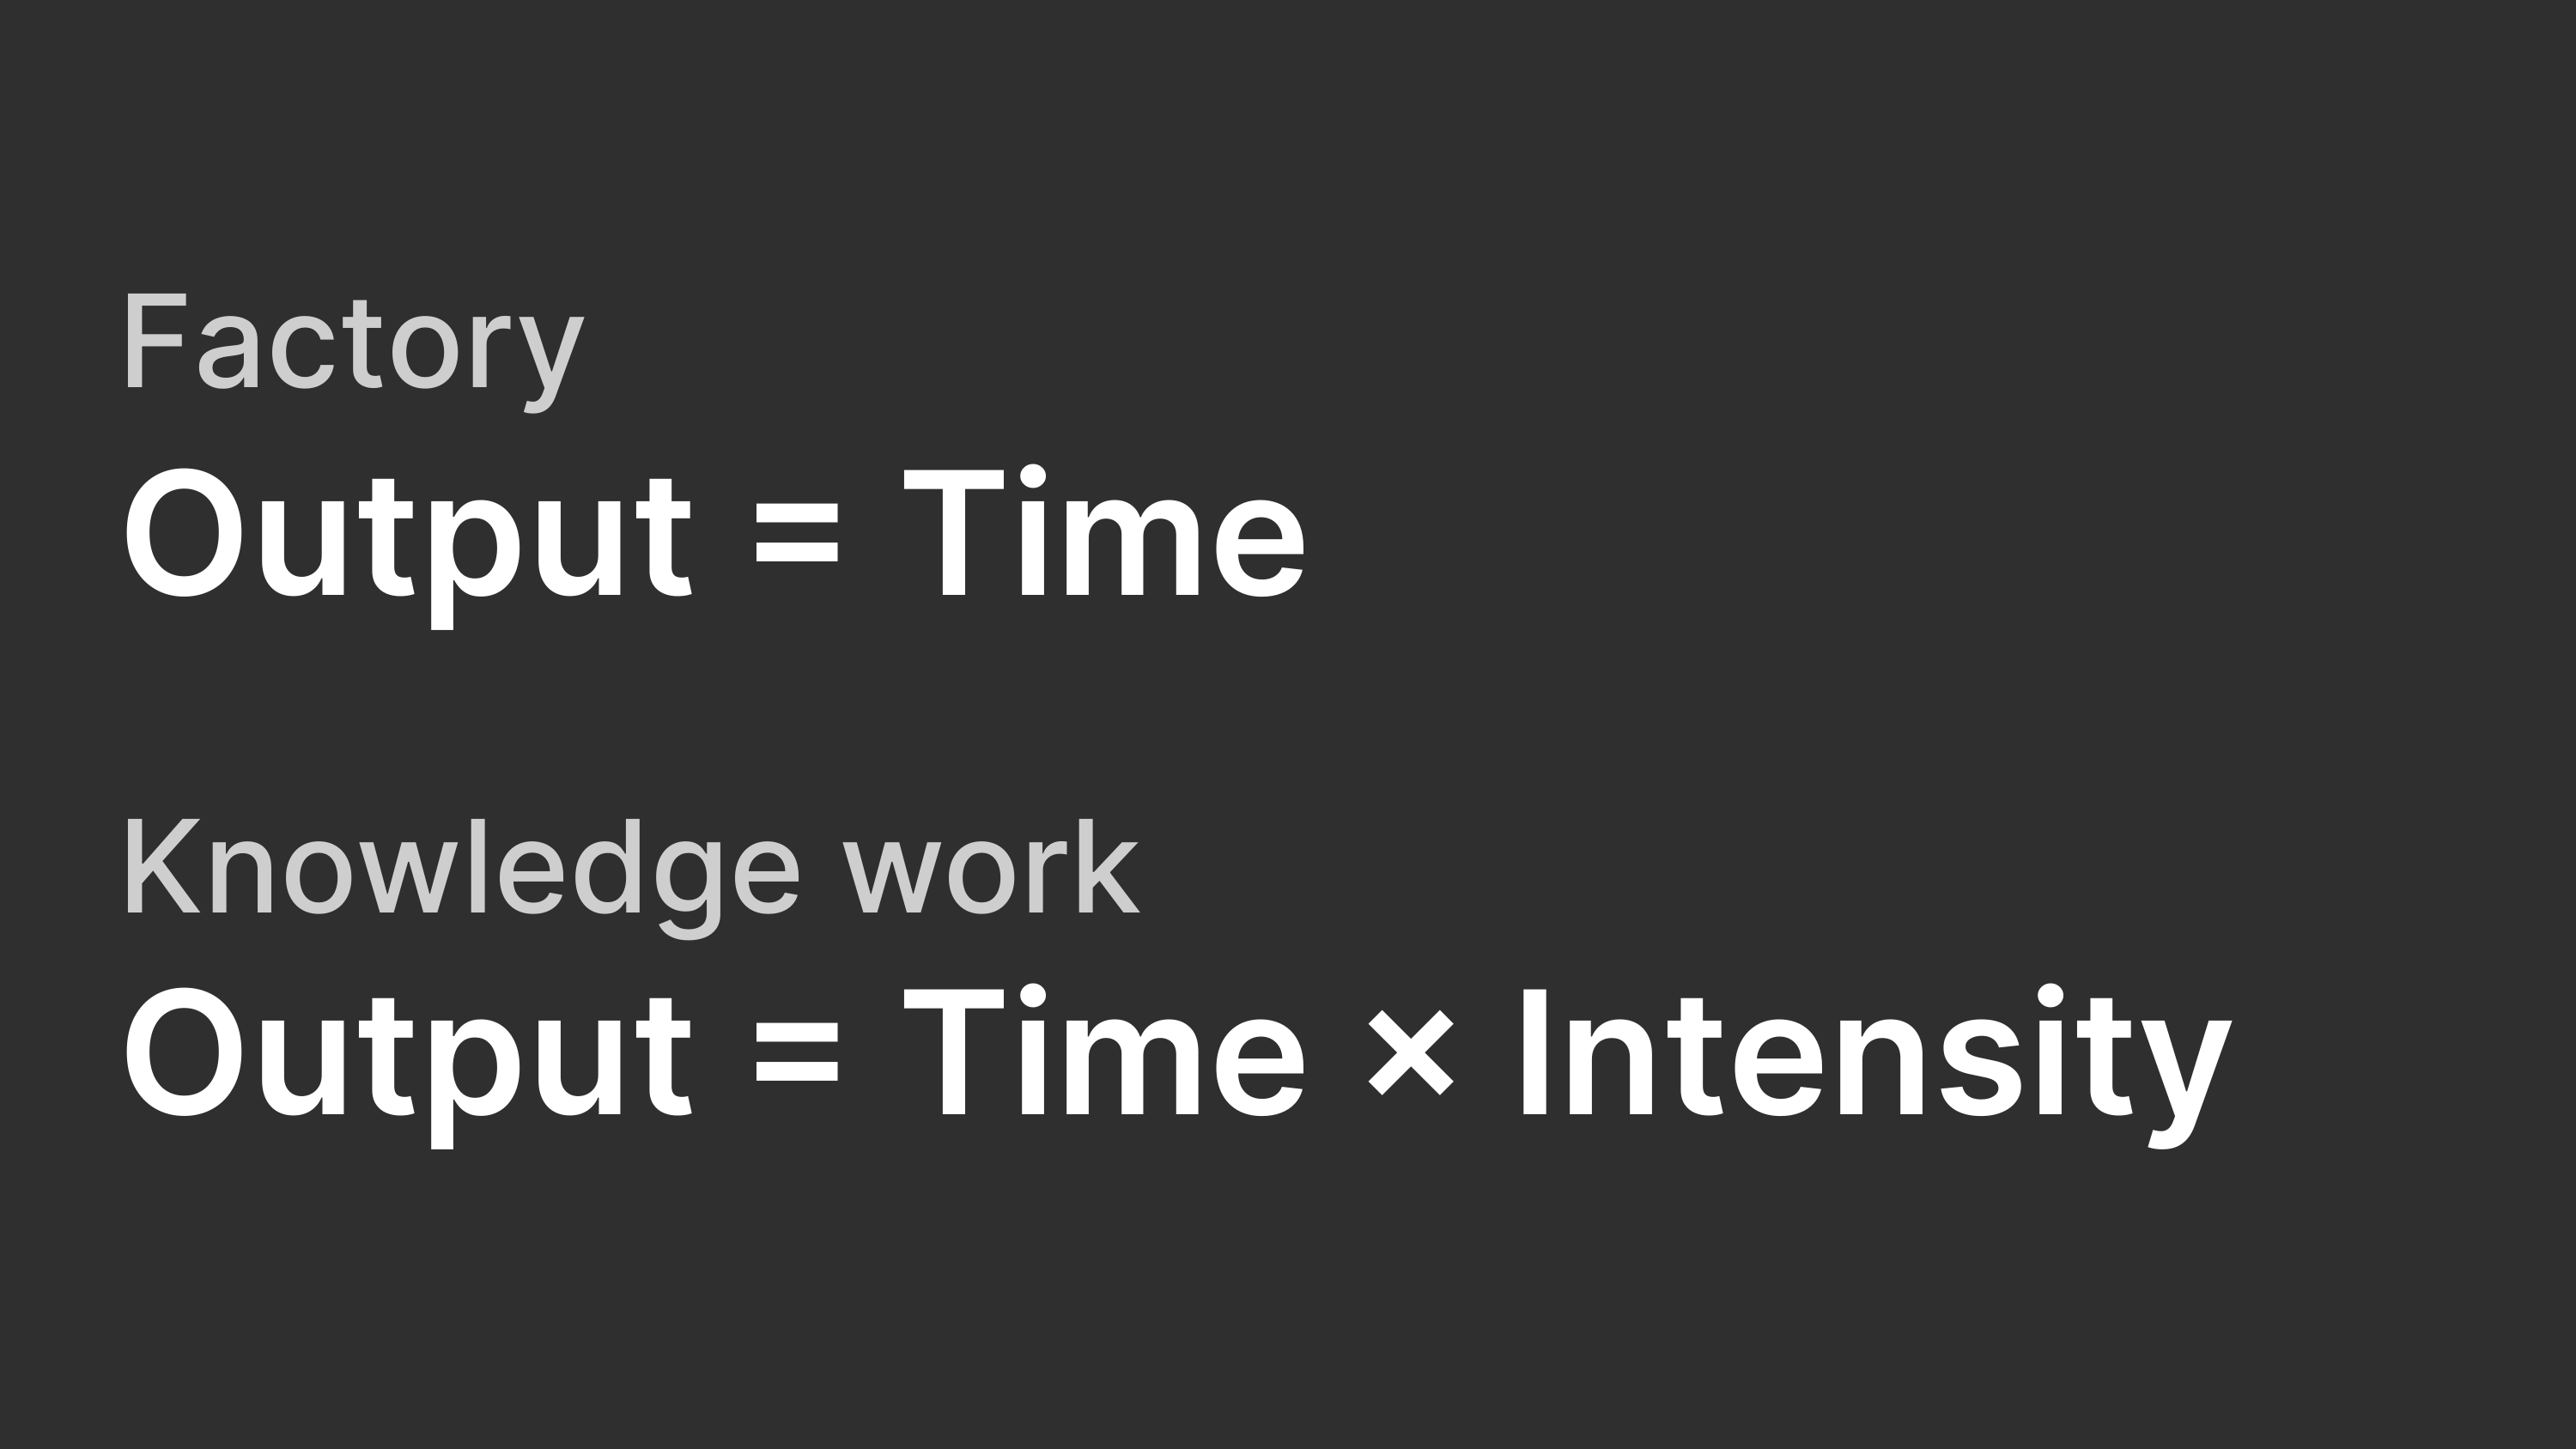 In a factory, output was determined time input. In knowledge work, output is determined by both time and intensity input.